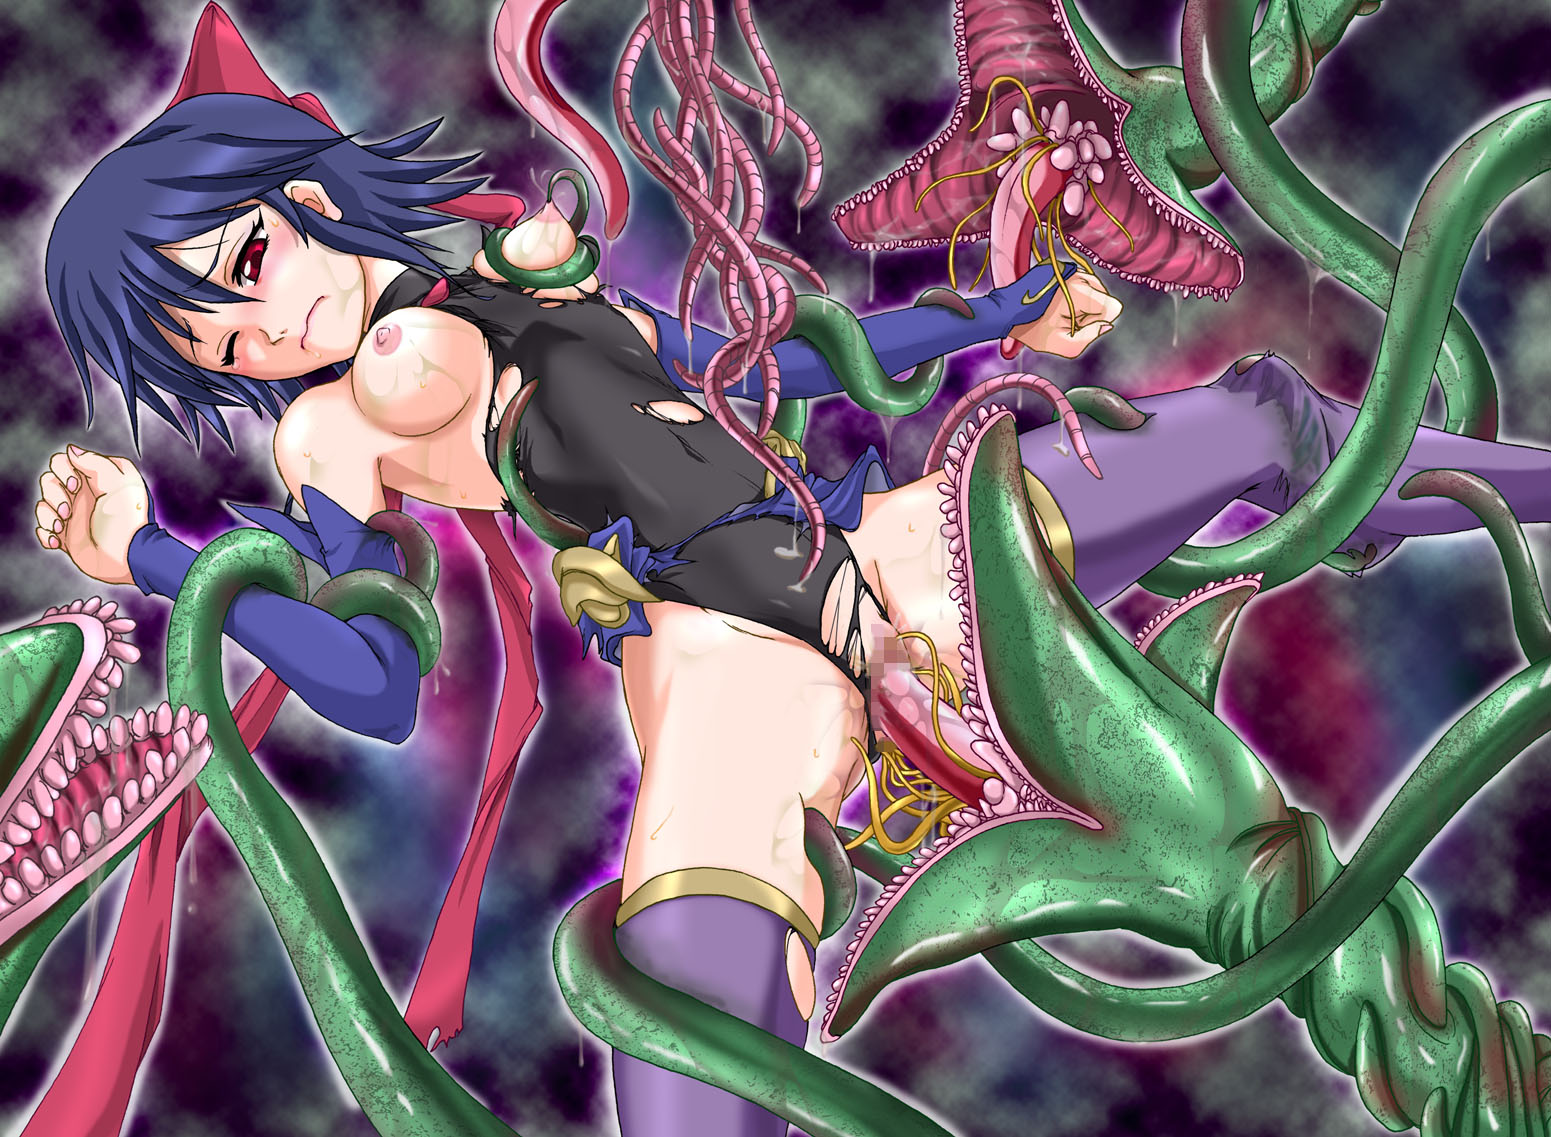 Tentacle Toons - Hot Hentai Porn With Cute Whores.